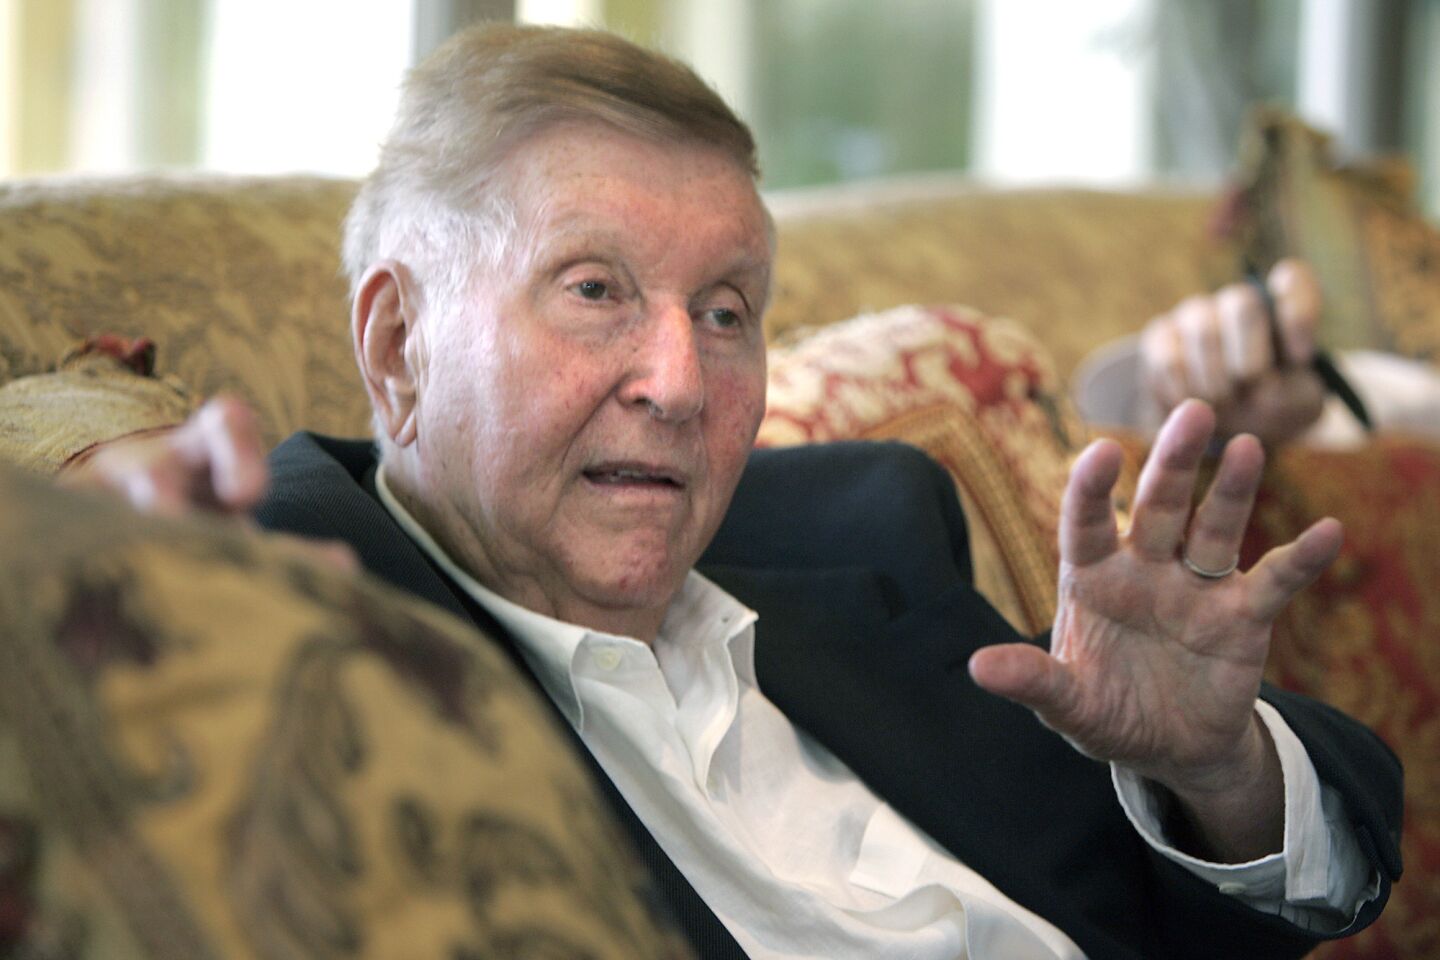 Sumner Redstone outmaneuvered rivals to assemble one of America’s leading entertainment companies, now called ViacomCBS, which boasts CBS, Comedy Central, MTV, Nickelodeon, BET, Showtime, the Simon & Schuster book publisher and Paramount Pictures movie studio. Unlike contemporaries Rupert Murdoch and Ted Turner, Redstone was not a visionary, but rather a hard-charging lawyer and deal maker who pursued power and wealth through the accumulation of content companies. He was 97.